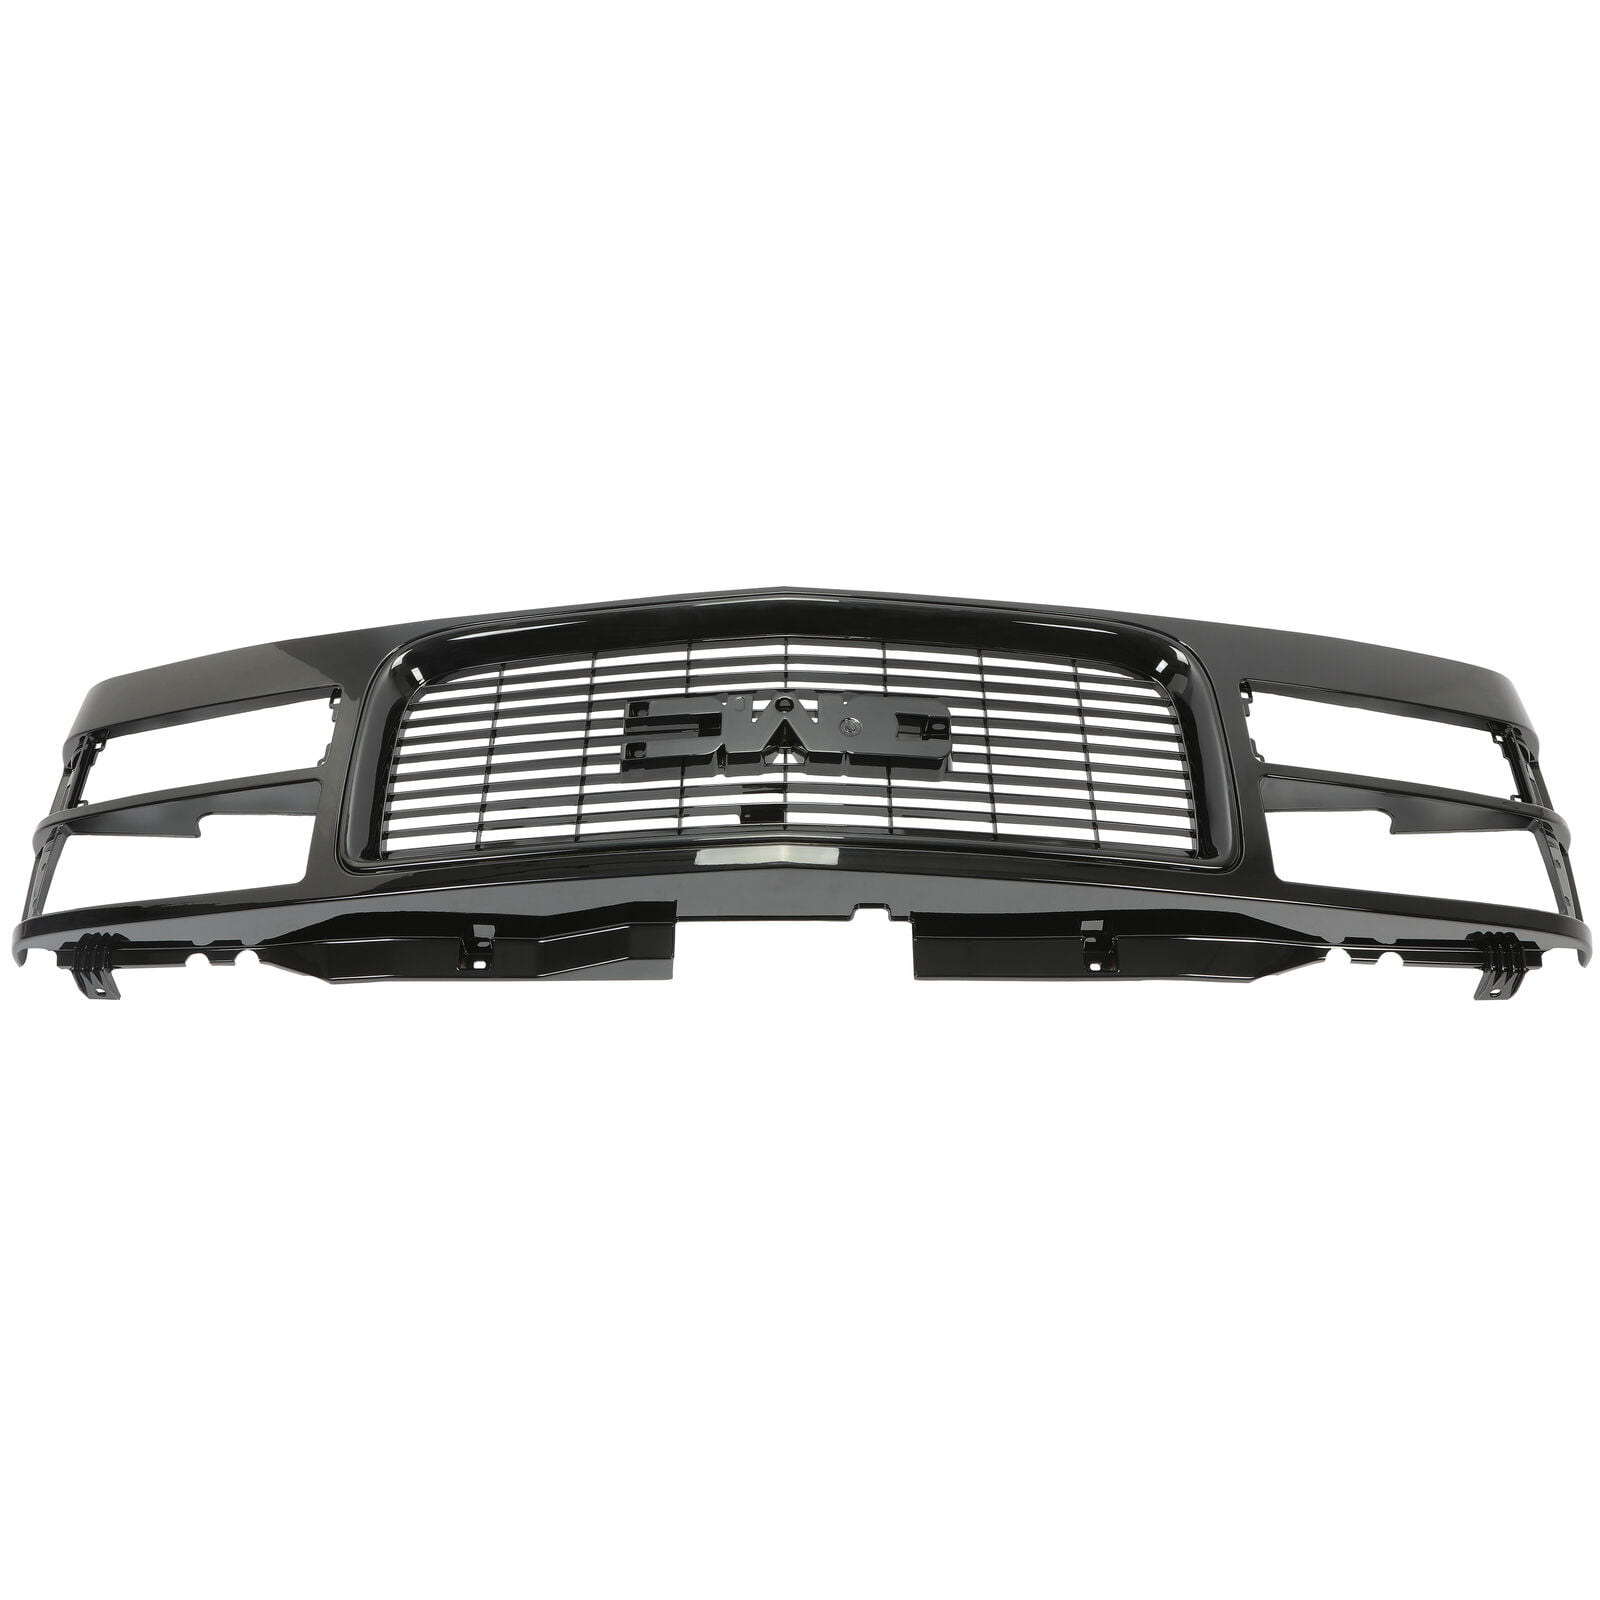 ECOTRIC Black Front Bumper Grille Grill Assembly Shell And Insert Compatible with GMC C/K Truck 1994-2000 Suburban/Yukon 1994-1999 w/Composite Headlights Replacemnt For GM1200357 